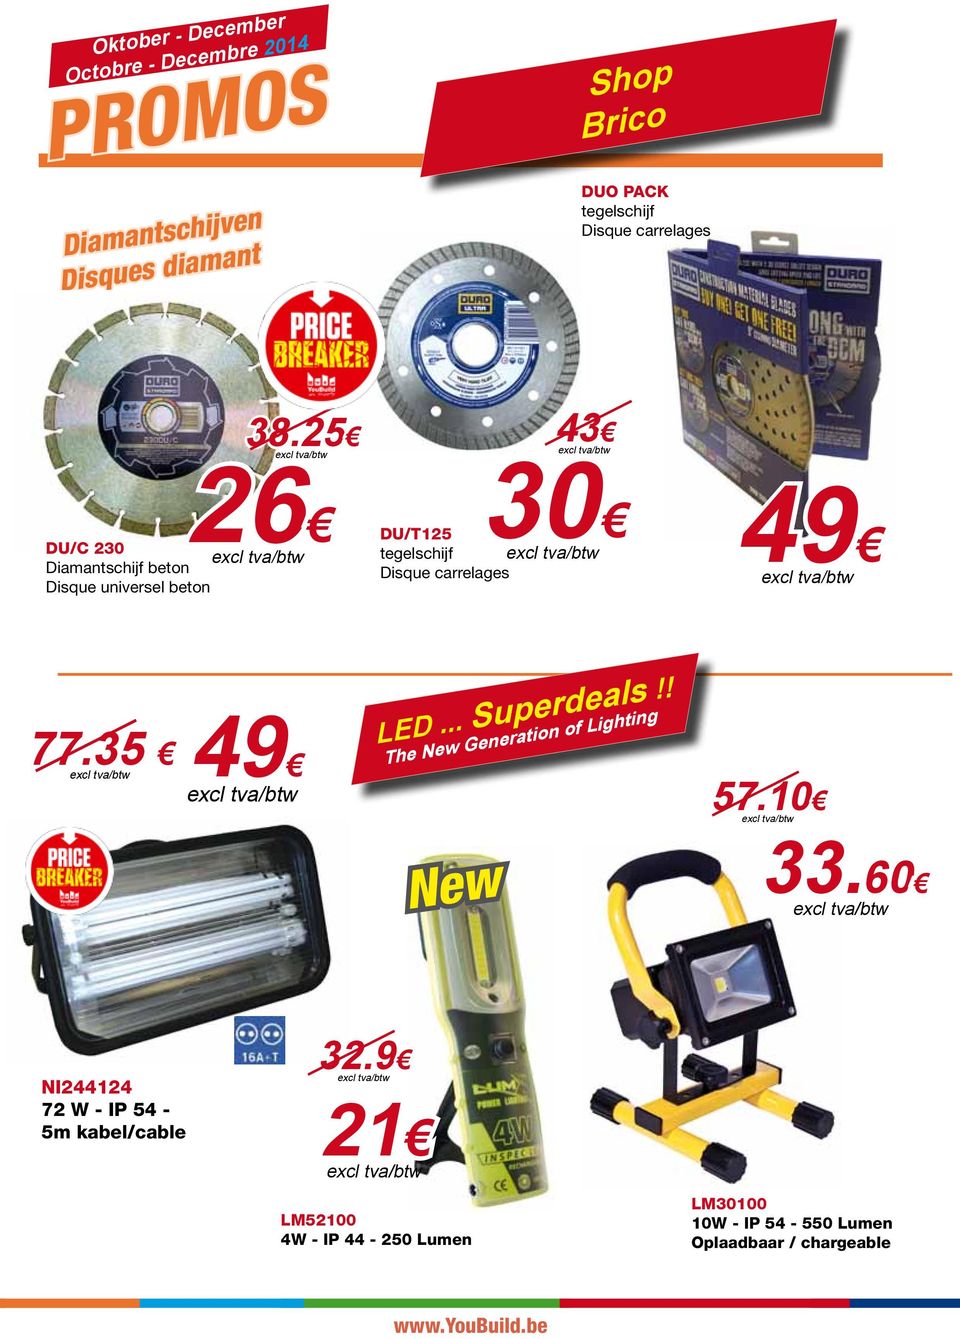 carrelages 49 77.35 49 LED... Superdeals!! The New Generation of Lighting New 57.10 33.